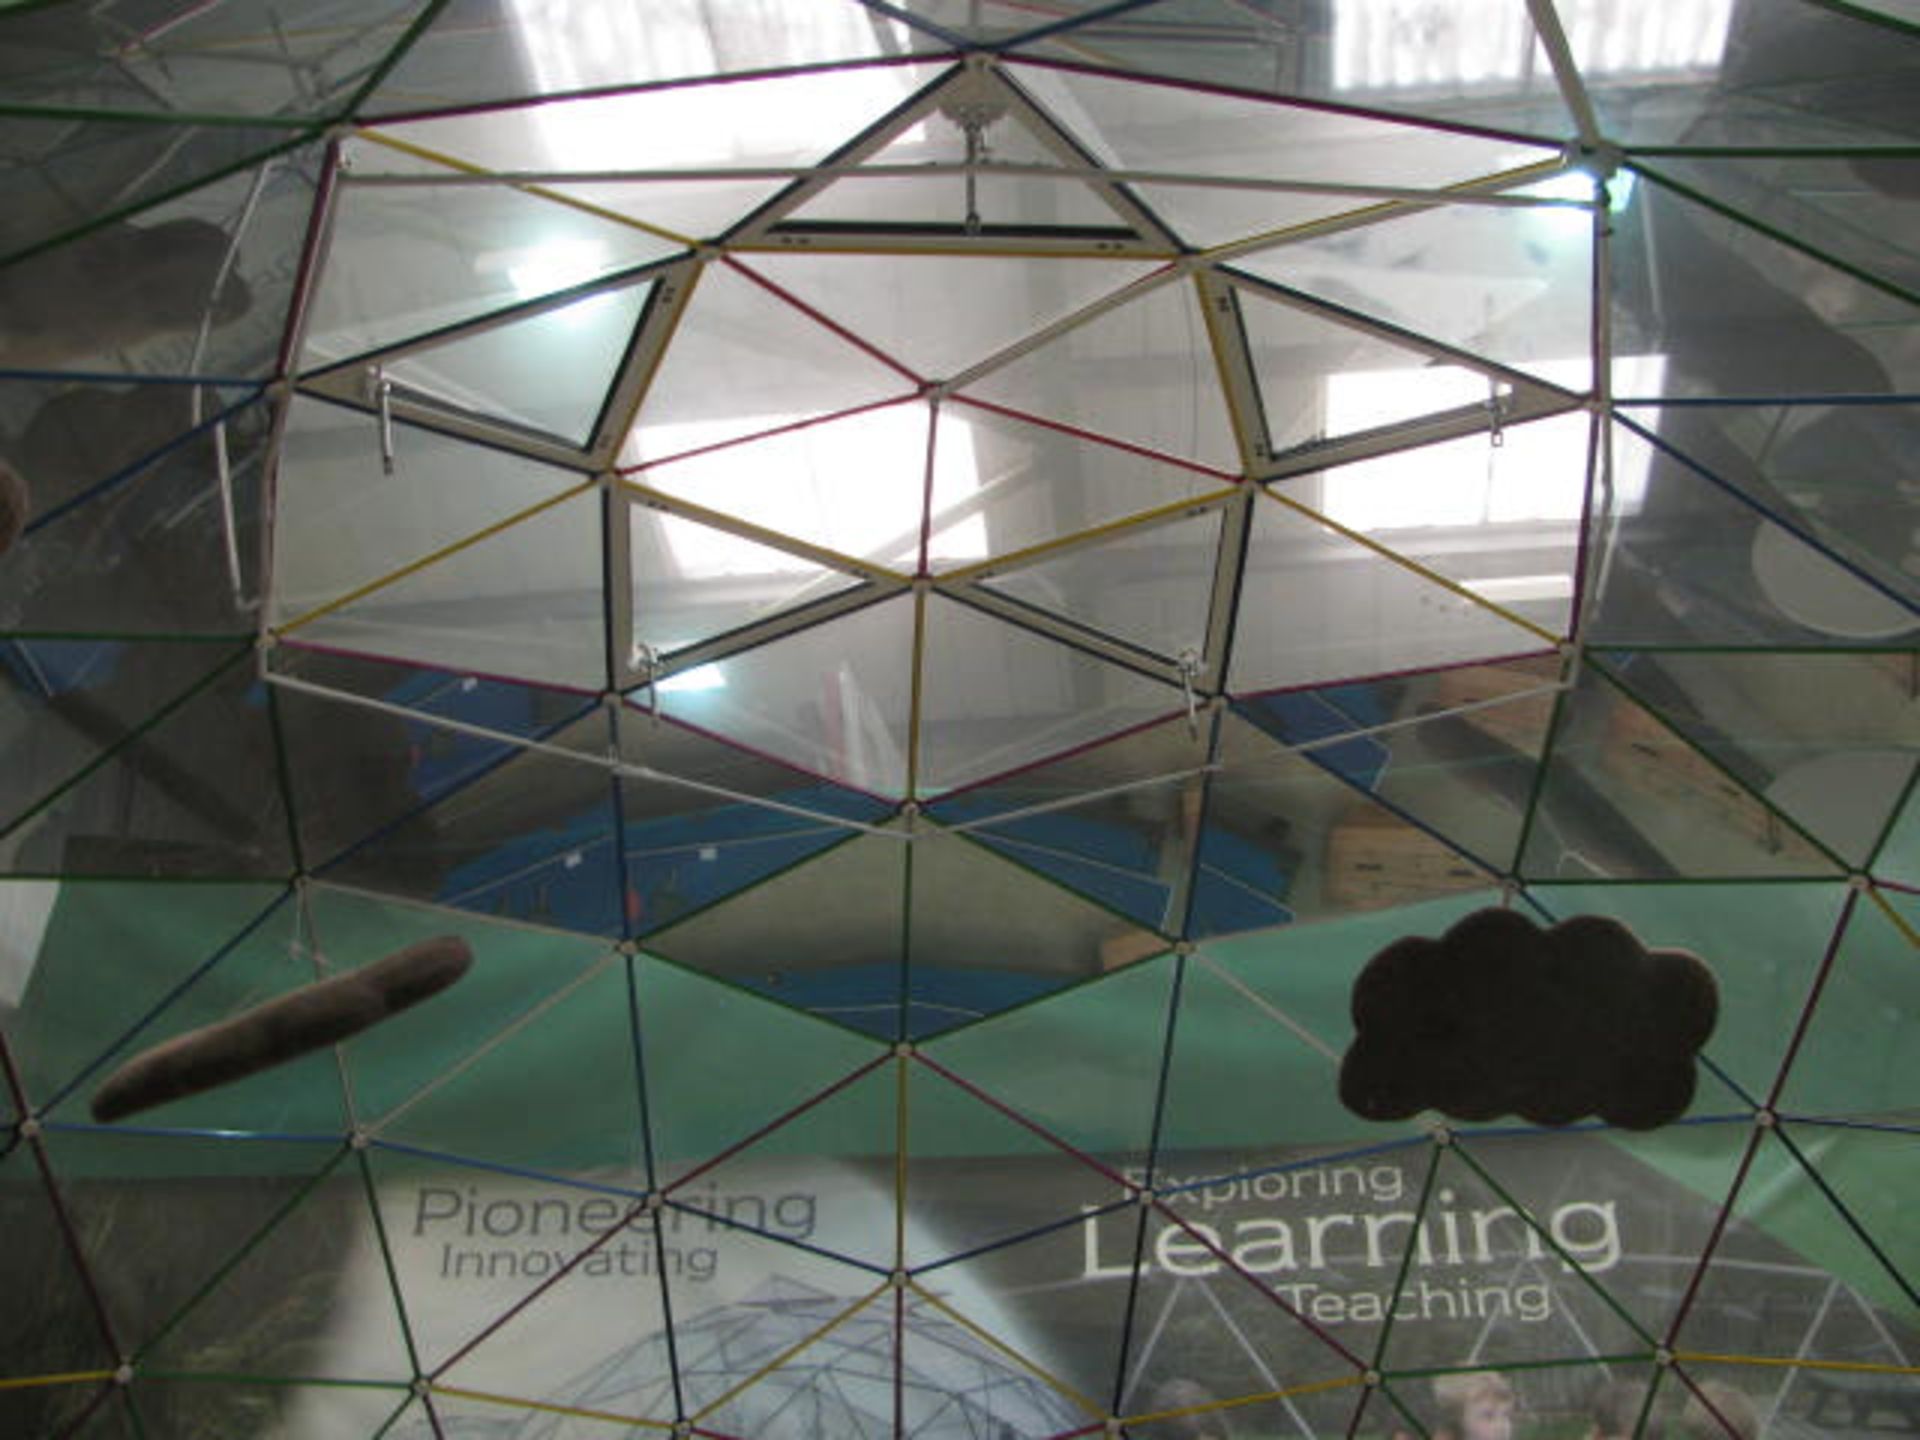 Geodesic dome garden room - Image 5 of 6